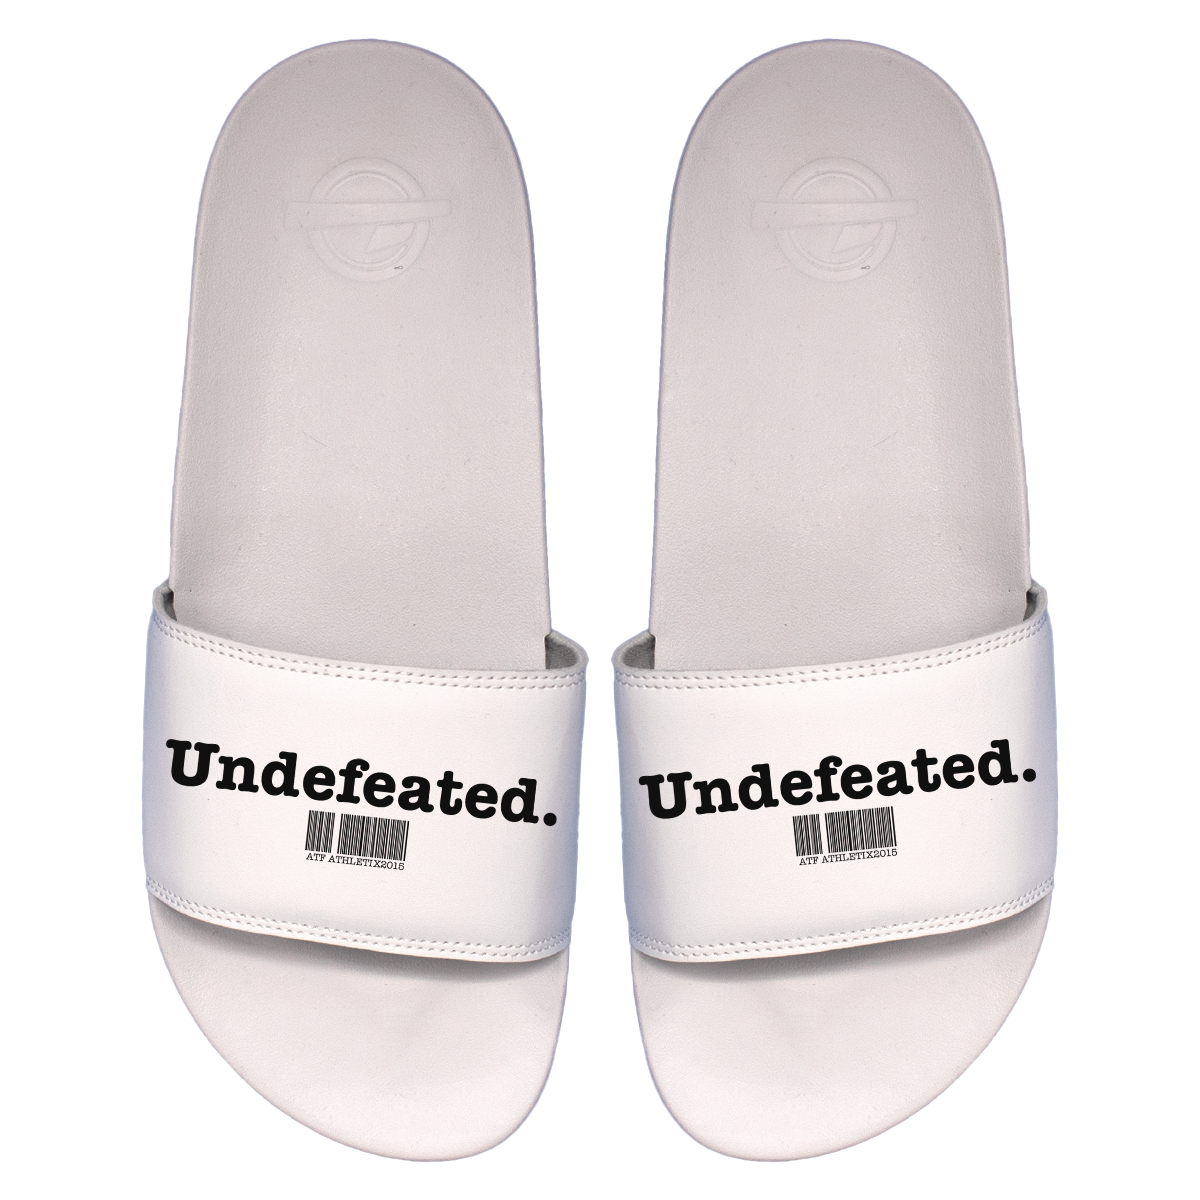 Undefeated Motto Slides